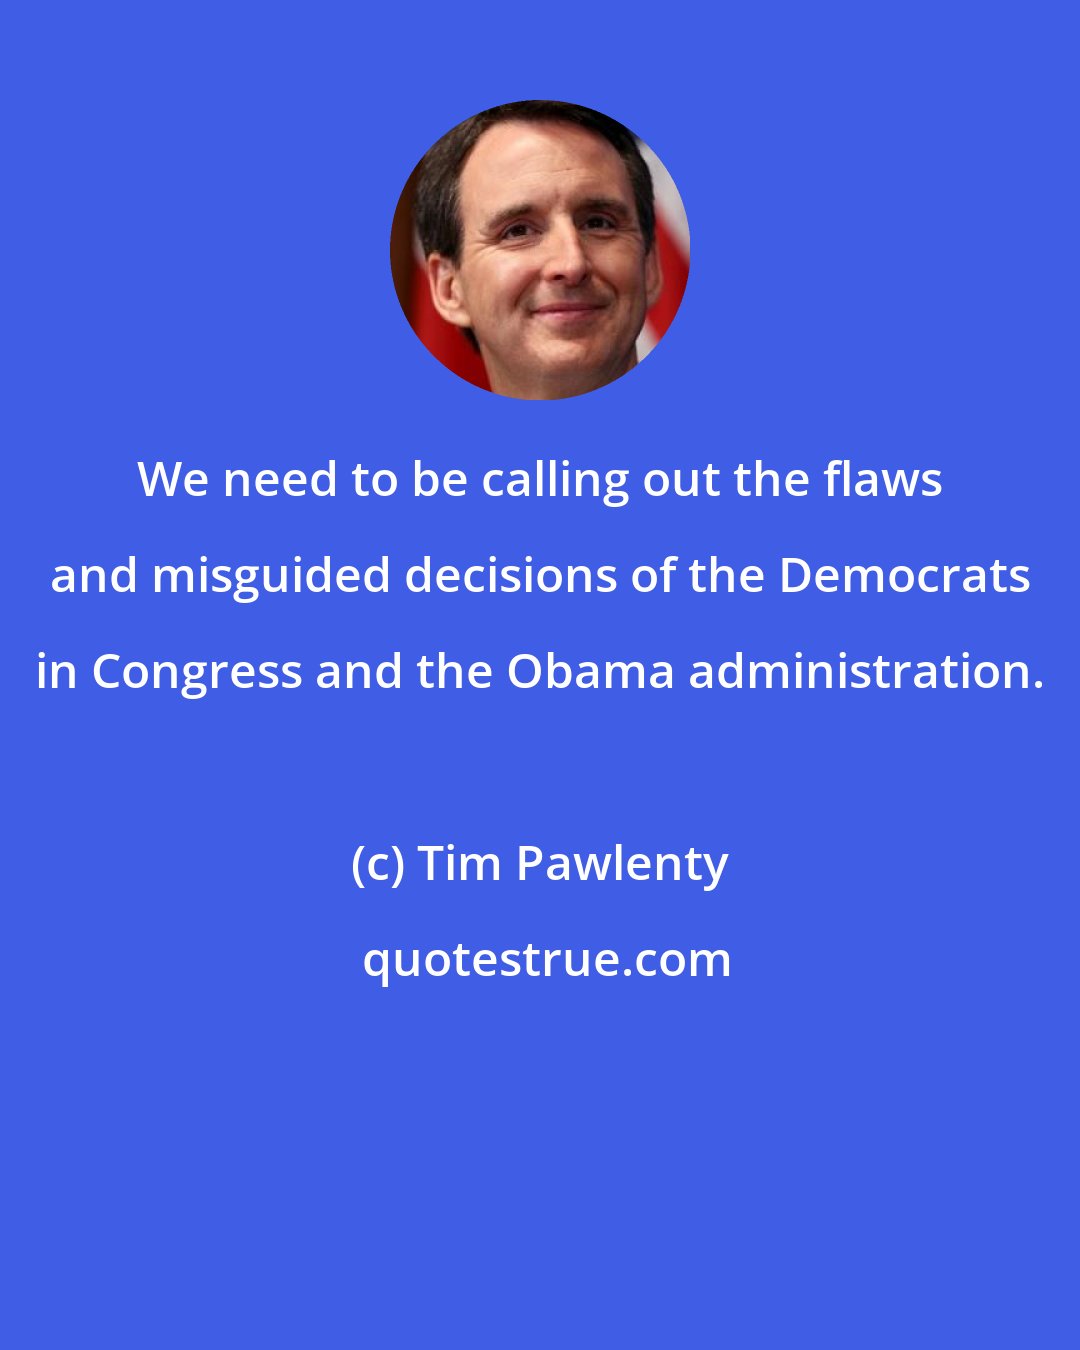 Tim Pawlenty: We need to be calling out the flaws and misguided decisions of the Democrats in Congress and the Obama administration.